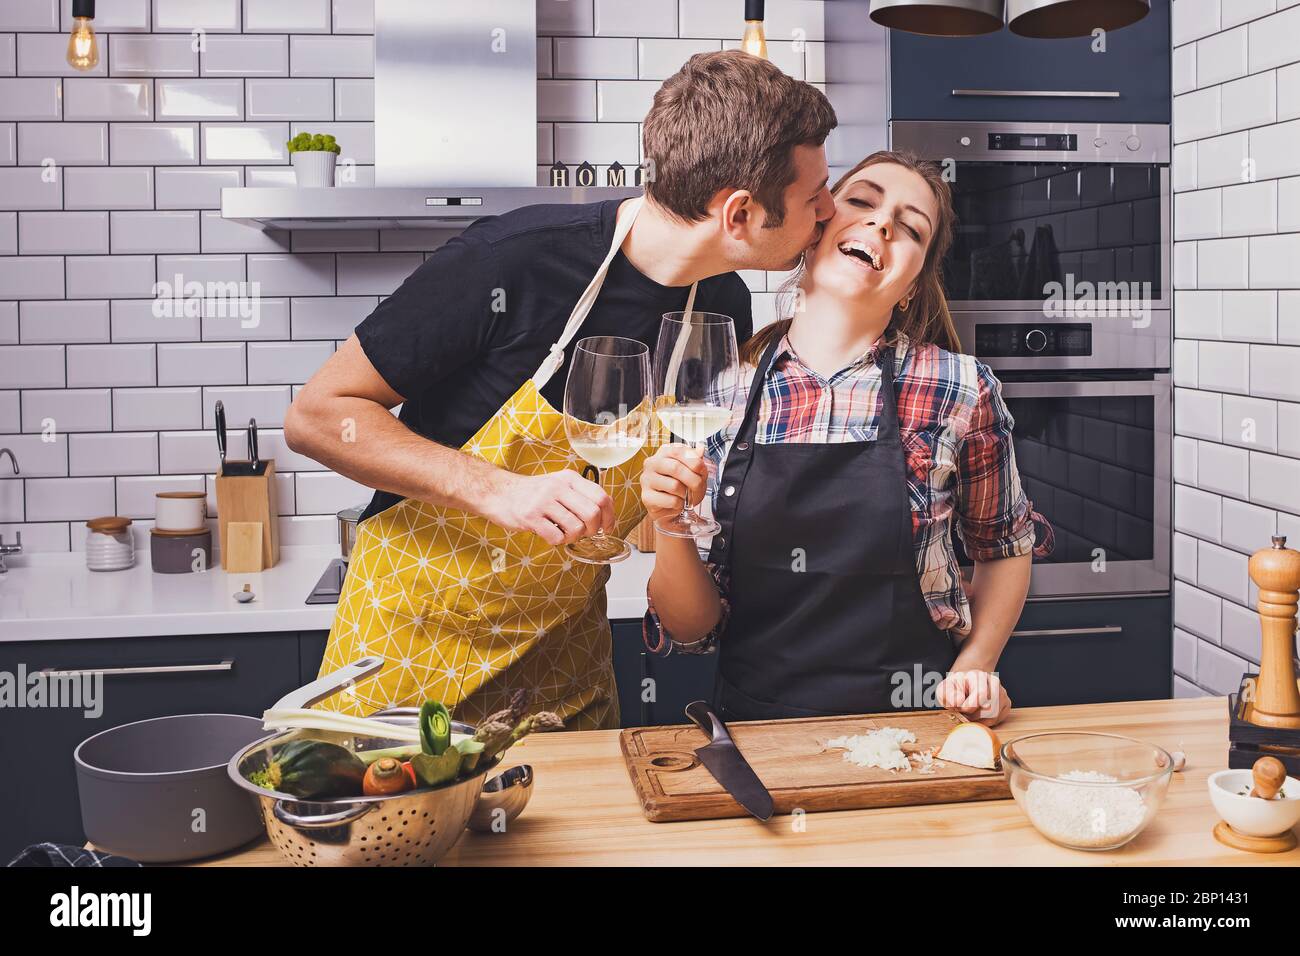 Young cheerful couple preparing food together Stock Photo